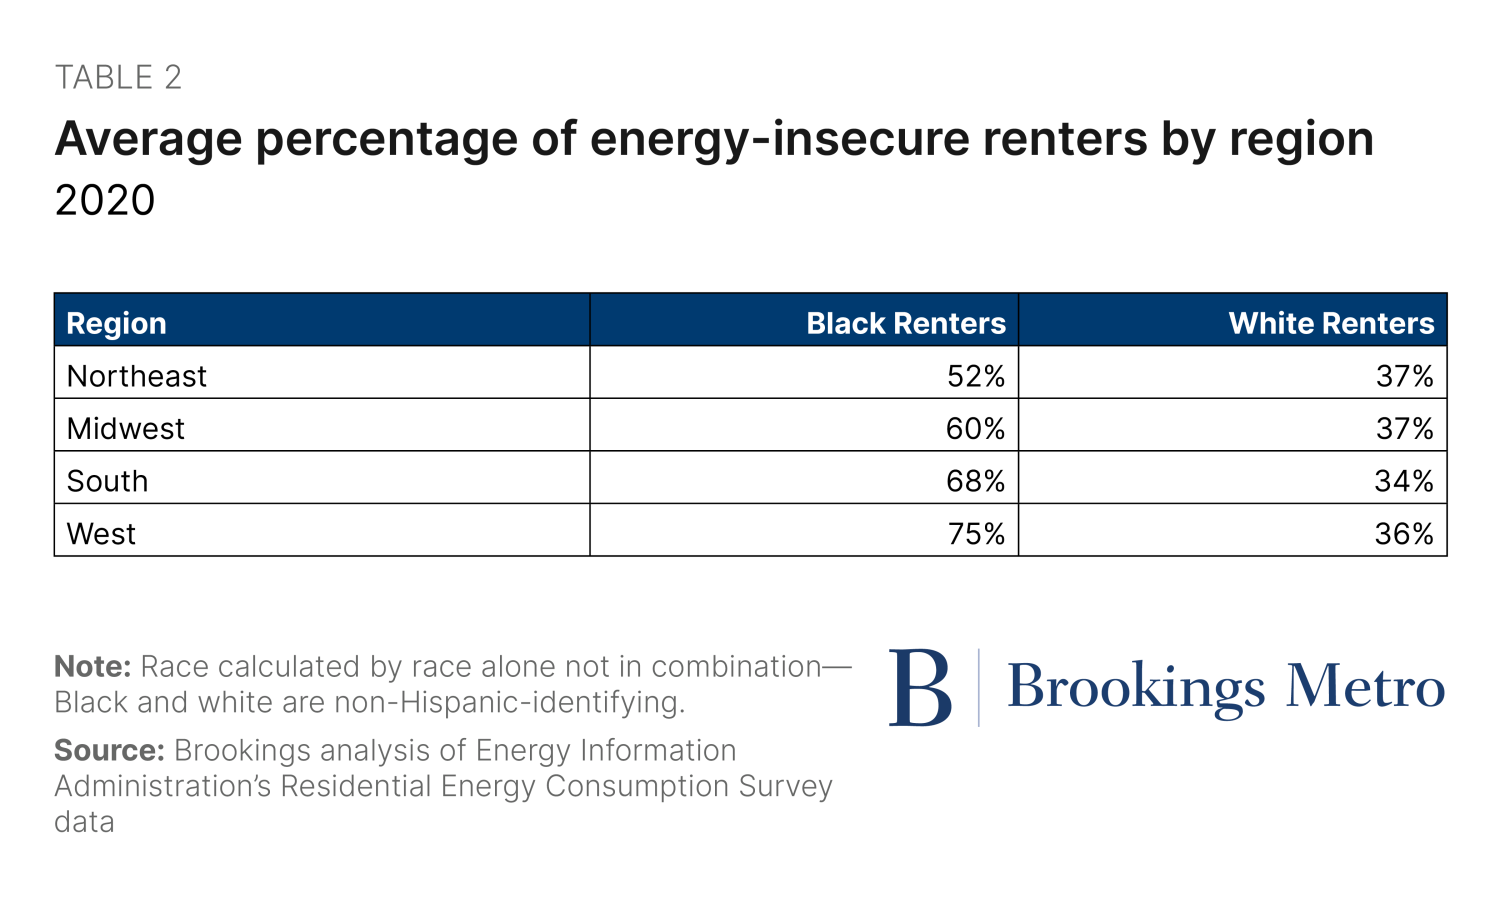 Table 2: Average percentage of energy-insecure renters by region, 2020